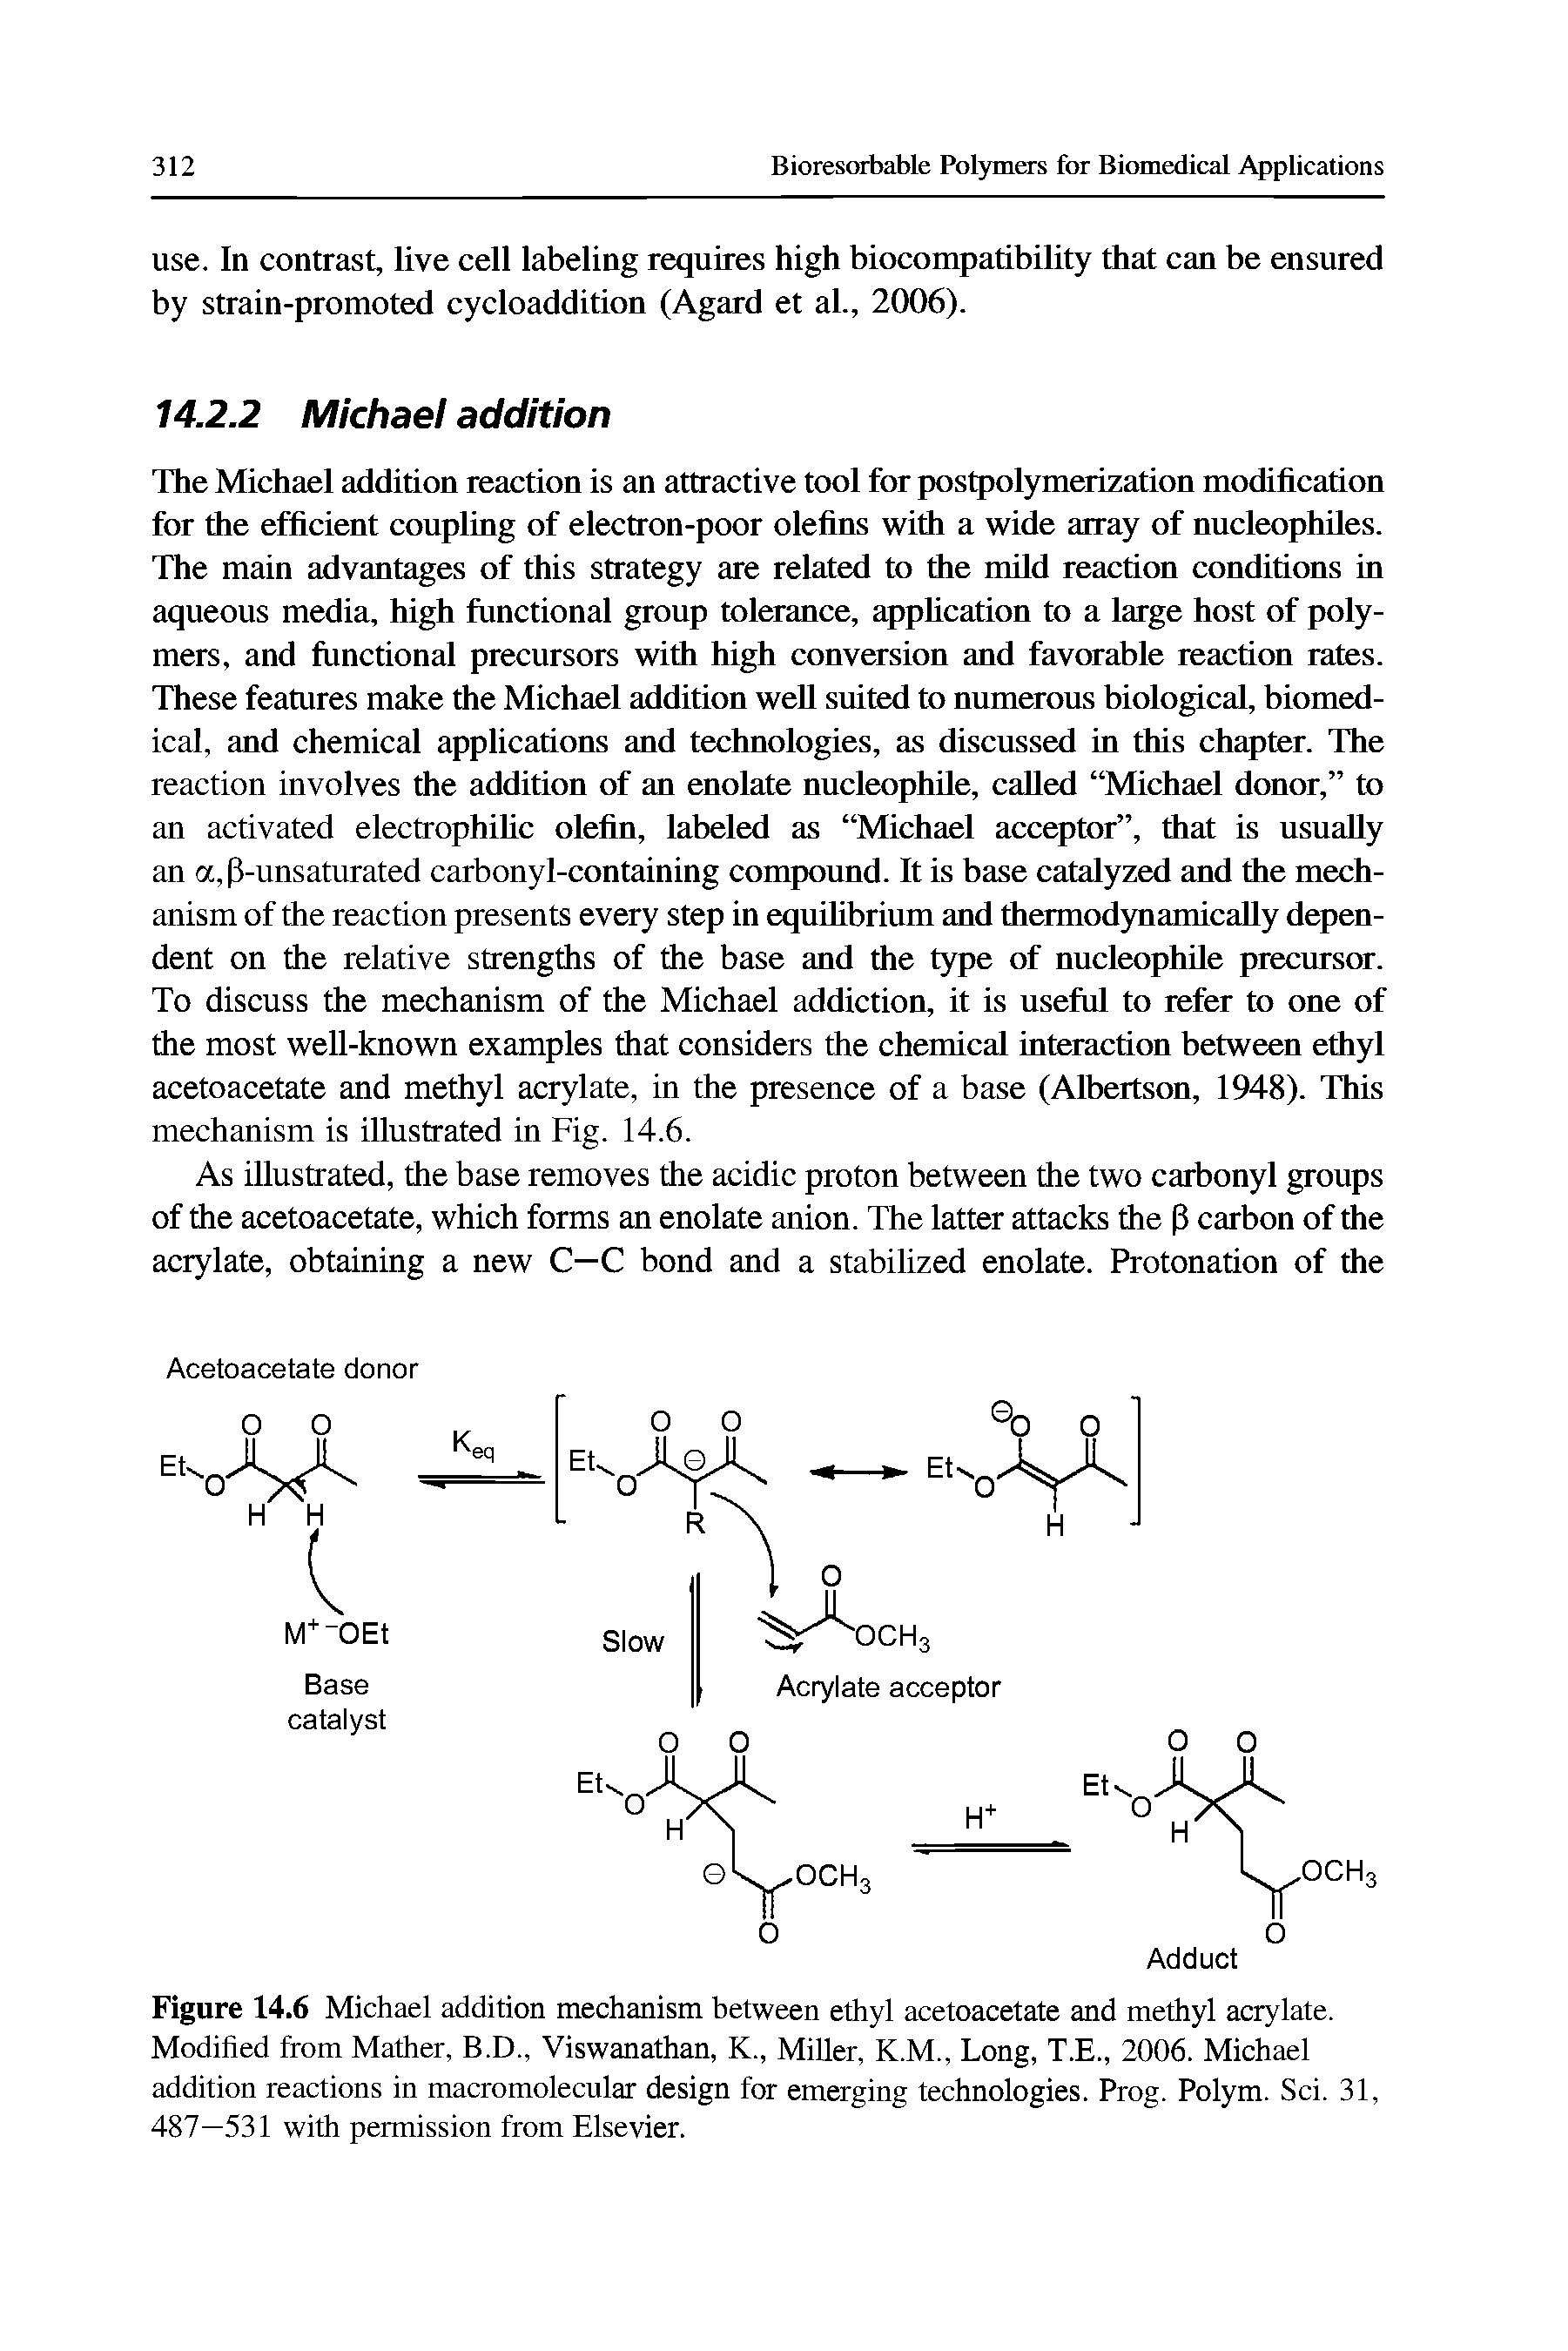 Figure 14.6 Michael addition mechanism between ethyl acetoacetate and methyl acrylate. Modified from Mather, B.D., Viswanathan, K., Miller, K.M., Long, T.E., 2006. Michael addition reactions in macromolecular design for emerging technologies. Prog. Polym. Sci. 31, 487—531 with permission from Elsevier.